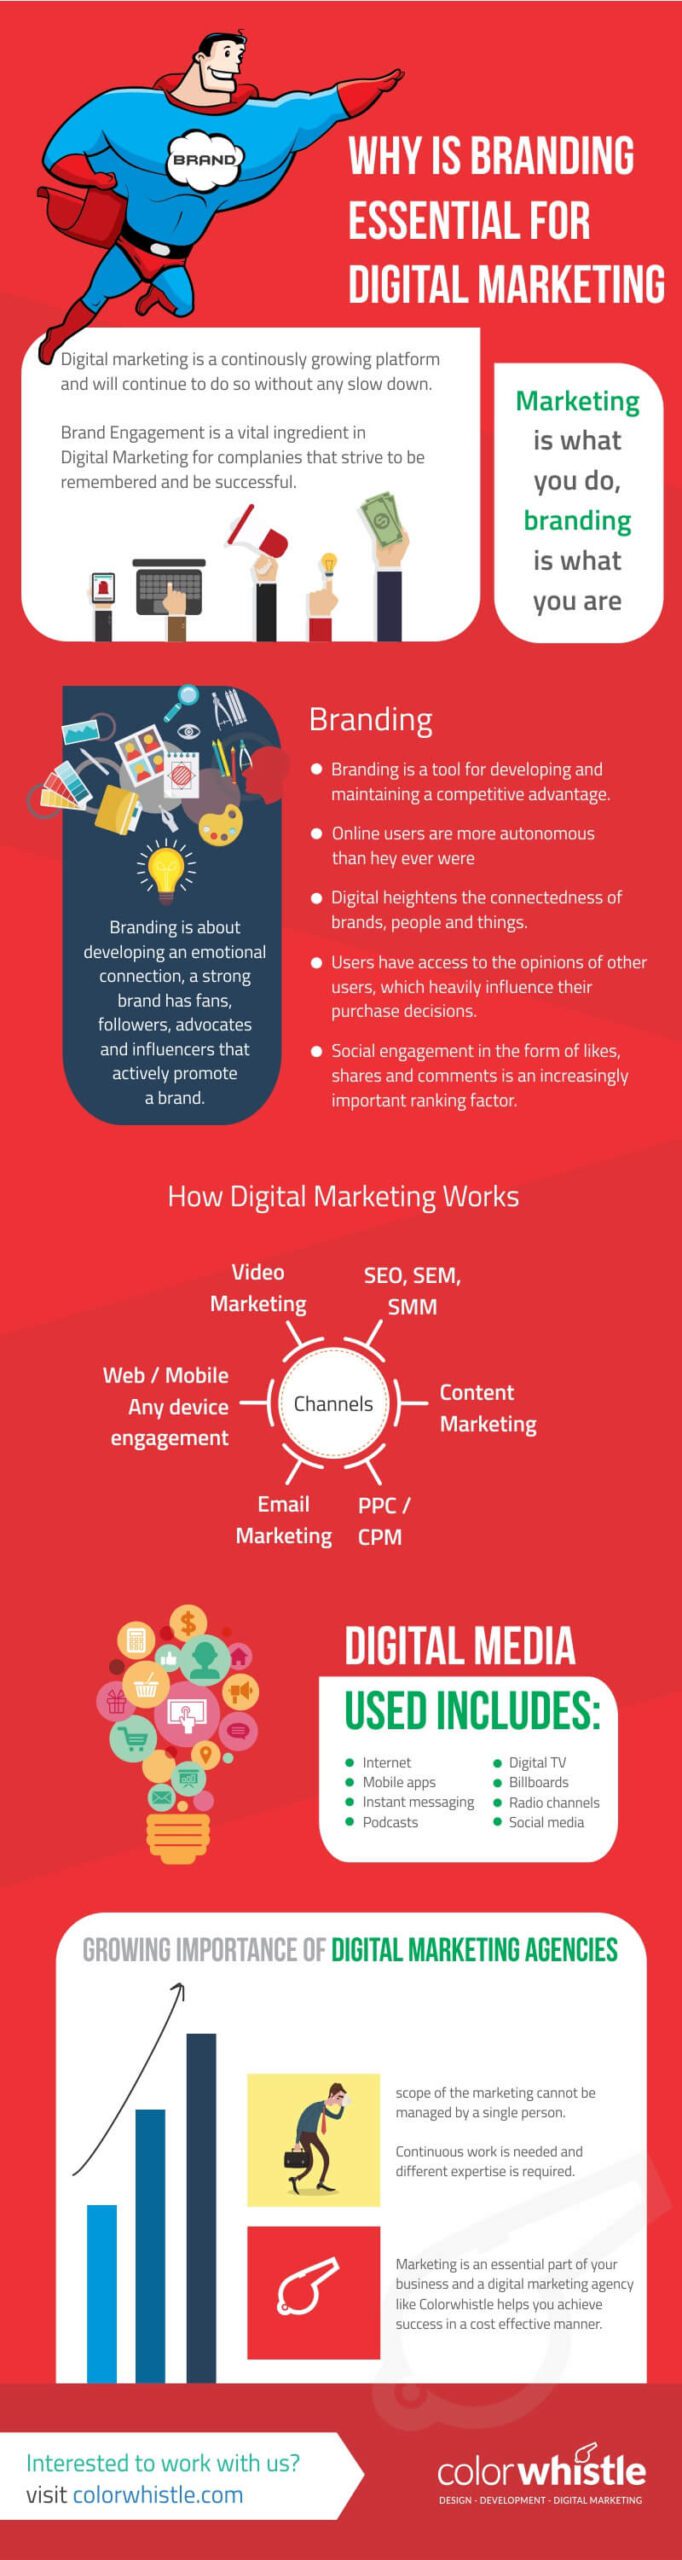 Why Branding is essential for Digital Marketing? (Small and medium-sized businesses) - ColorWhistle